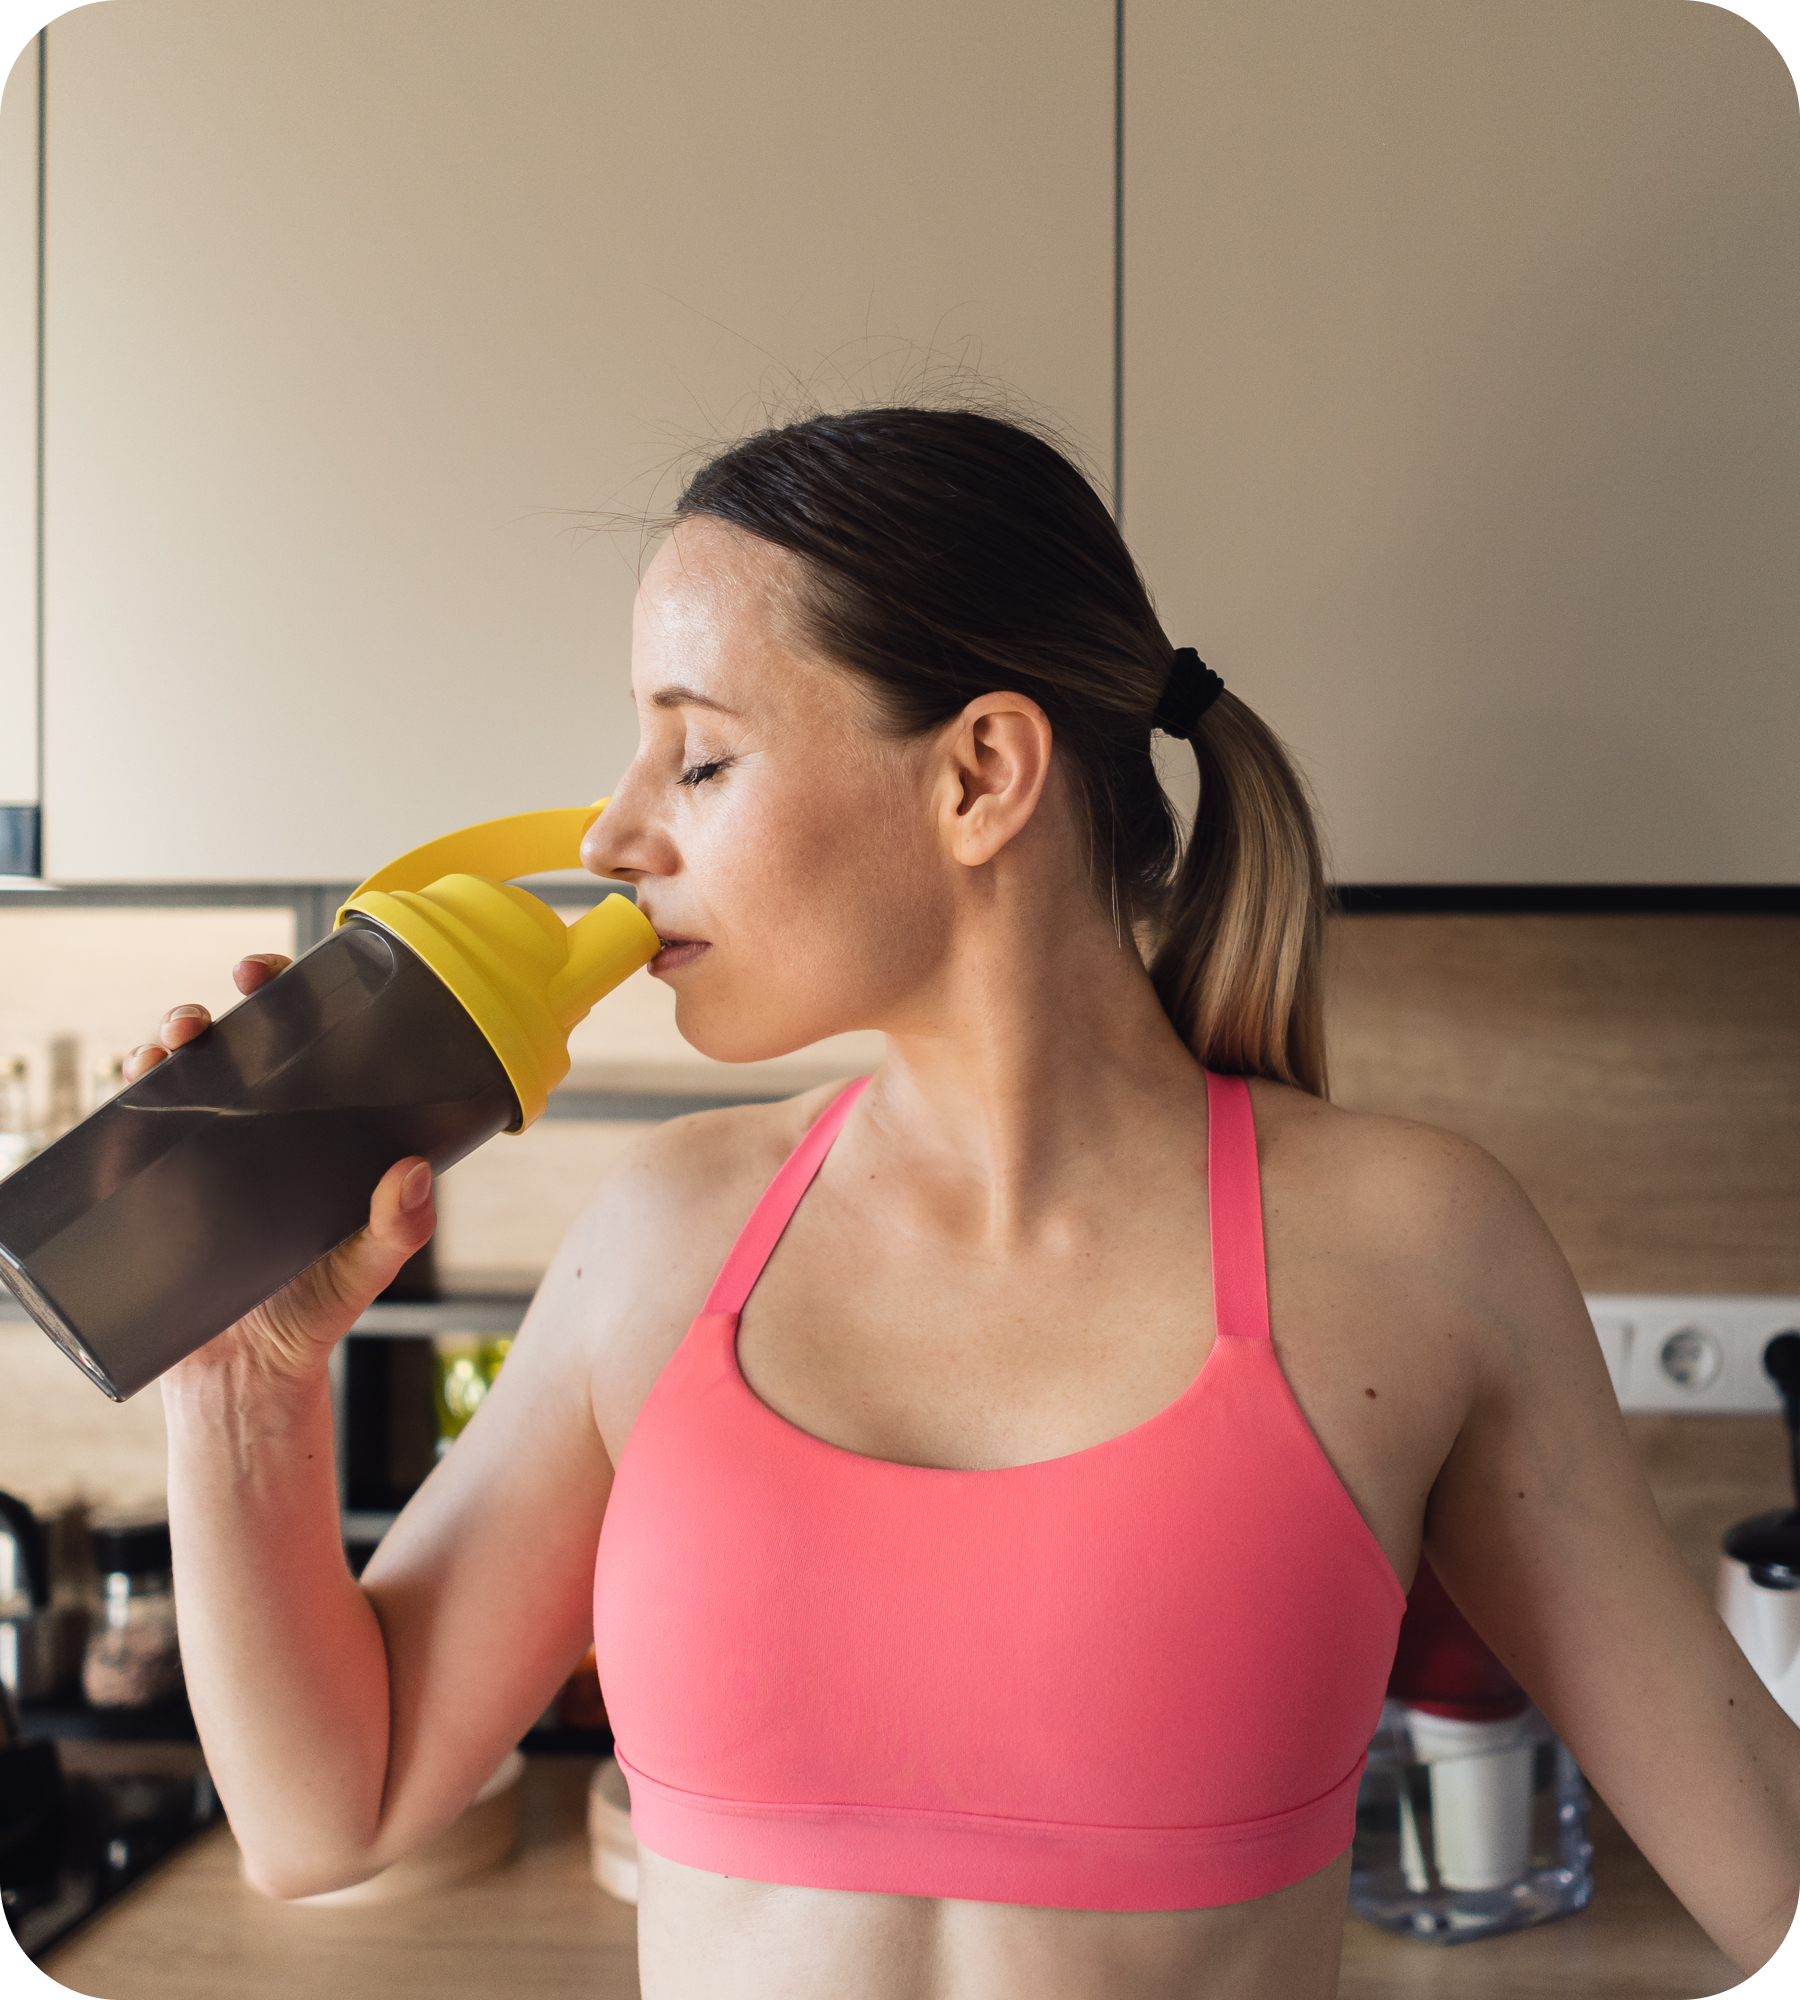 Can You Drink Protein Shakes Without Working Out?